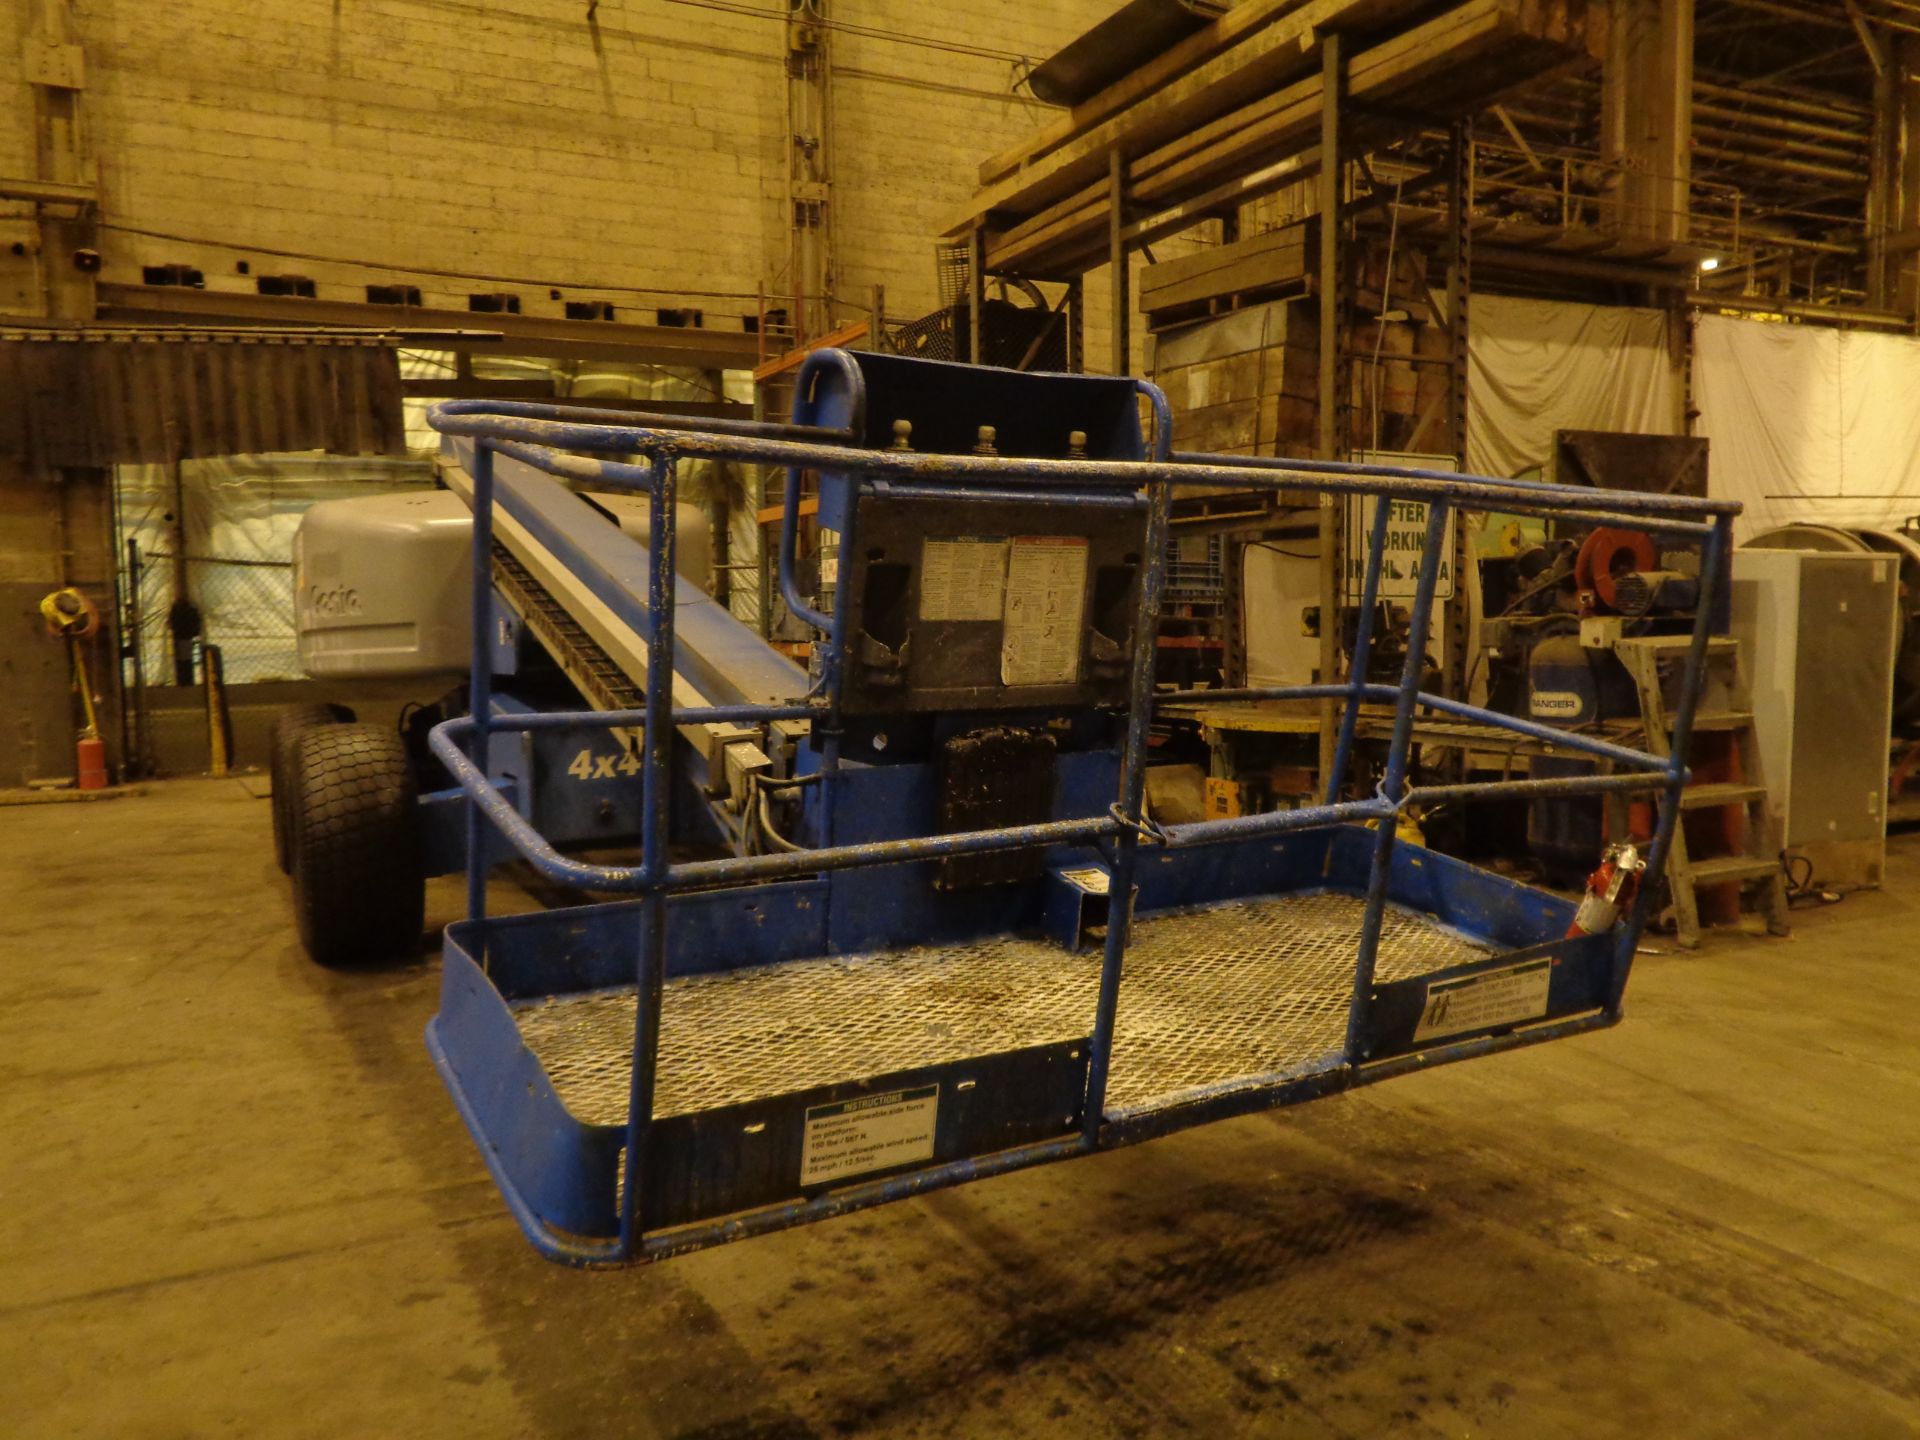 2008 Genie S60 Boom Lift 4x4 - 60FT Height - Image 6 of 19